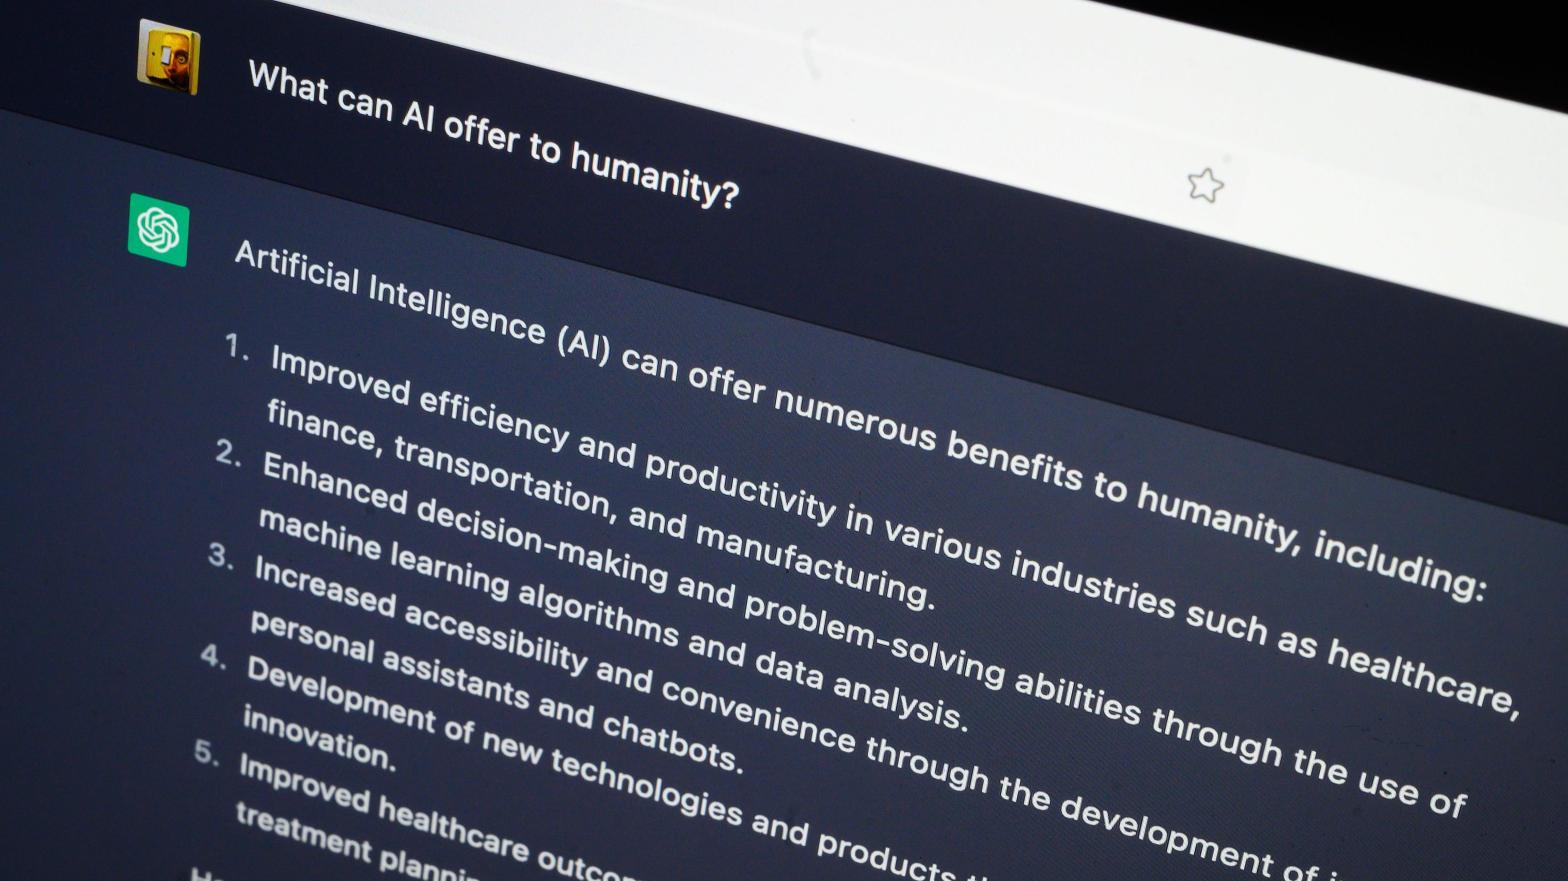 While the U.S. Chamber of Commerce noted AI can be beneficial in a number of applications, there's still the likelihood for economic and personal harm. (Photo: Leon Neal, Getty Images)